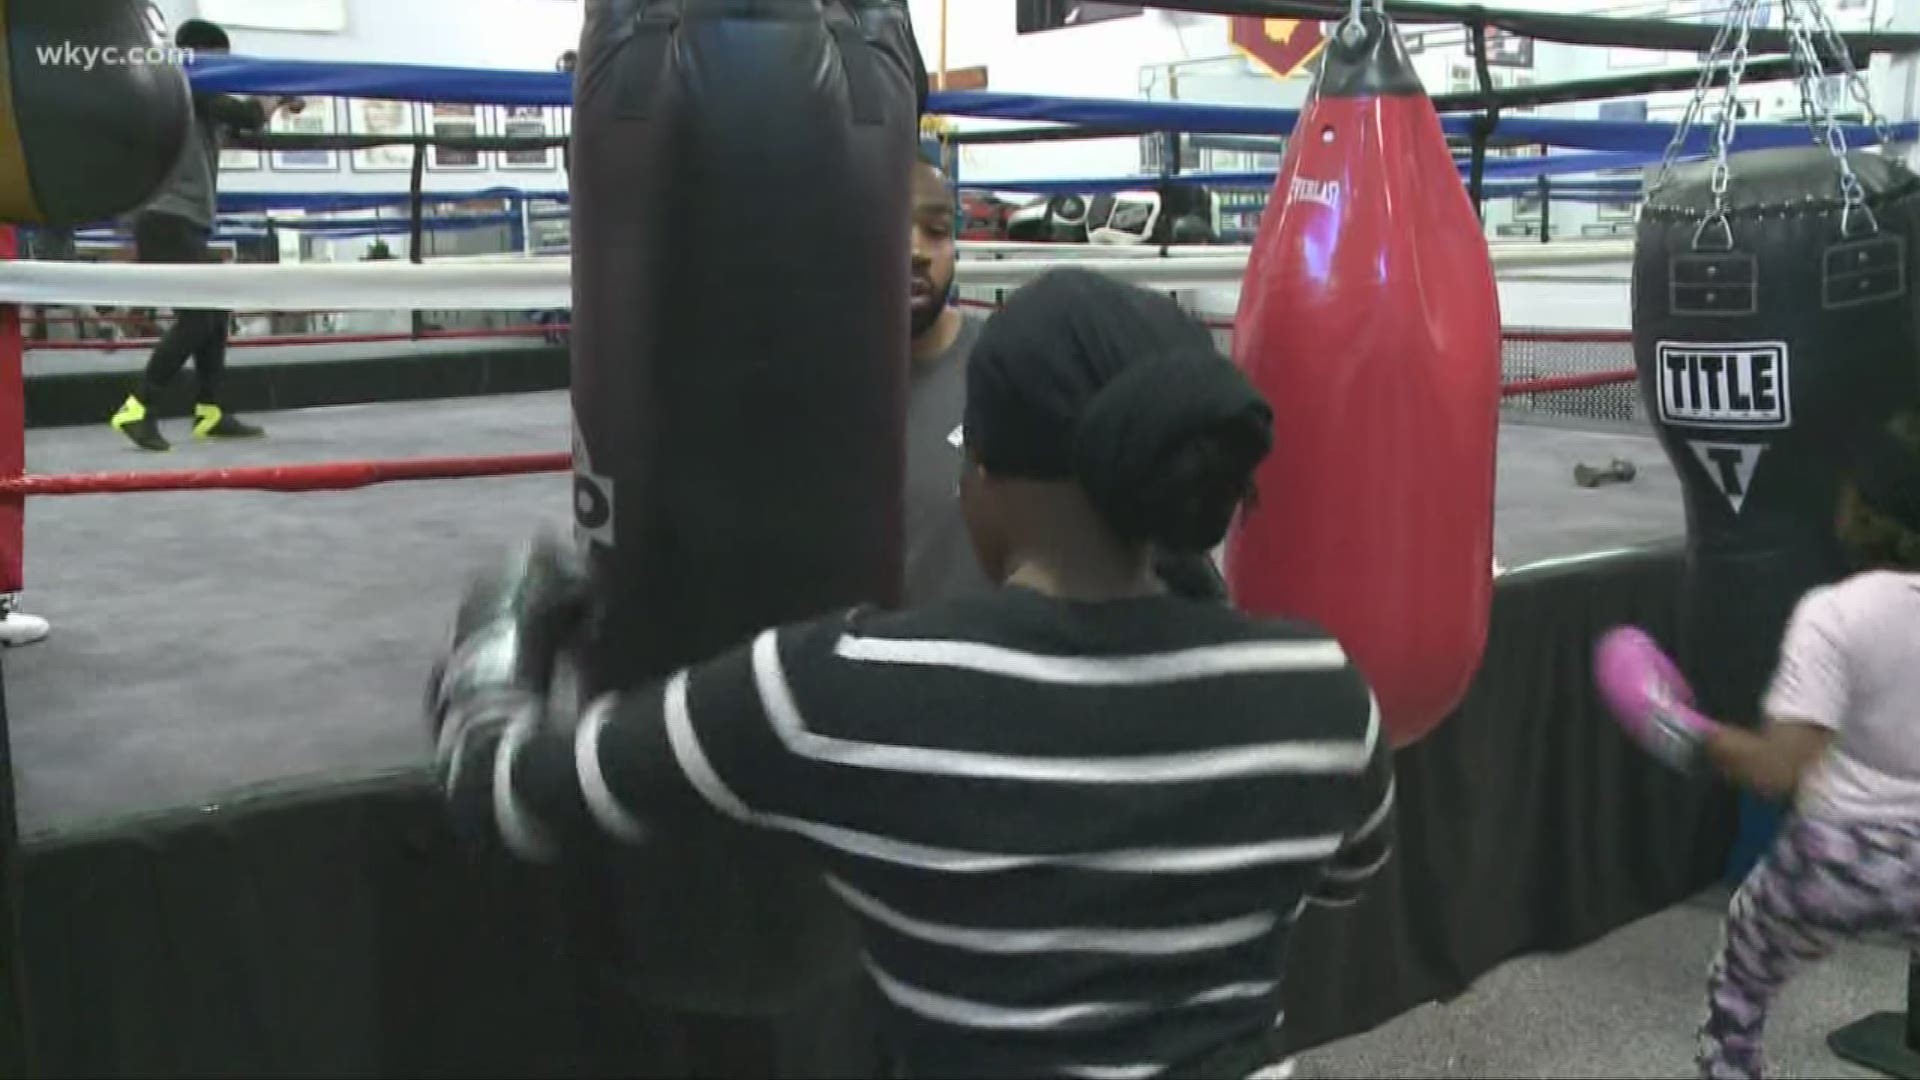 What risks do boxes face while in the ring and why? wkyc